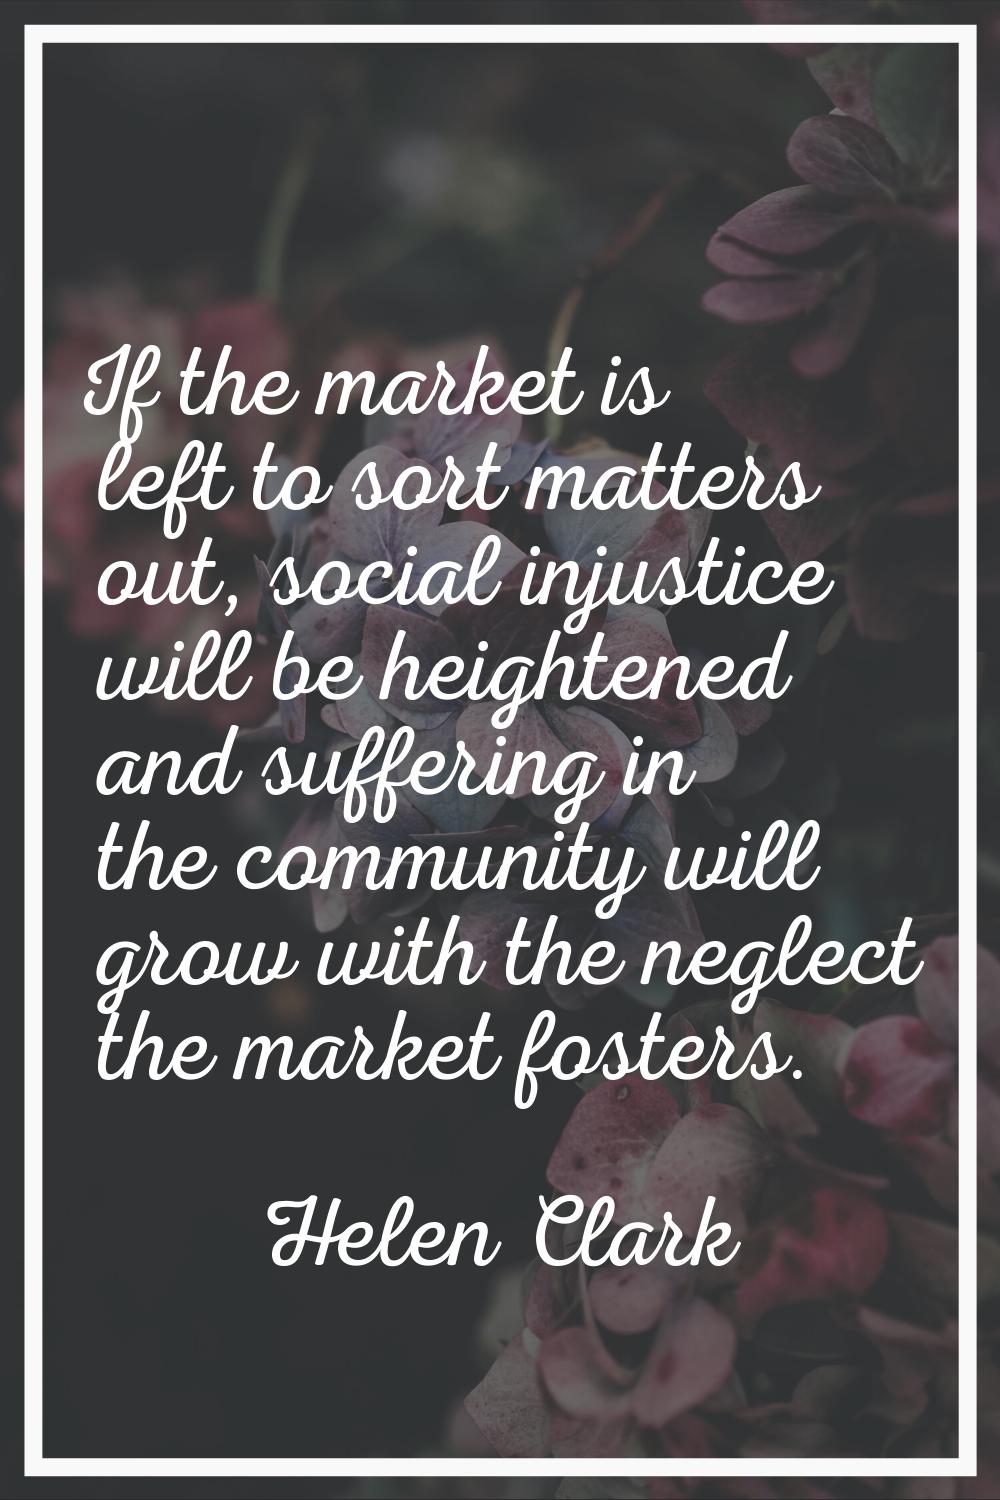 If the market is left to sort matters out, social injustice will be heightened and suffering in the